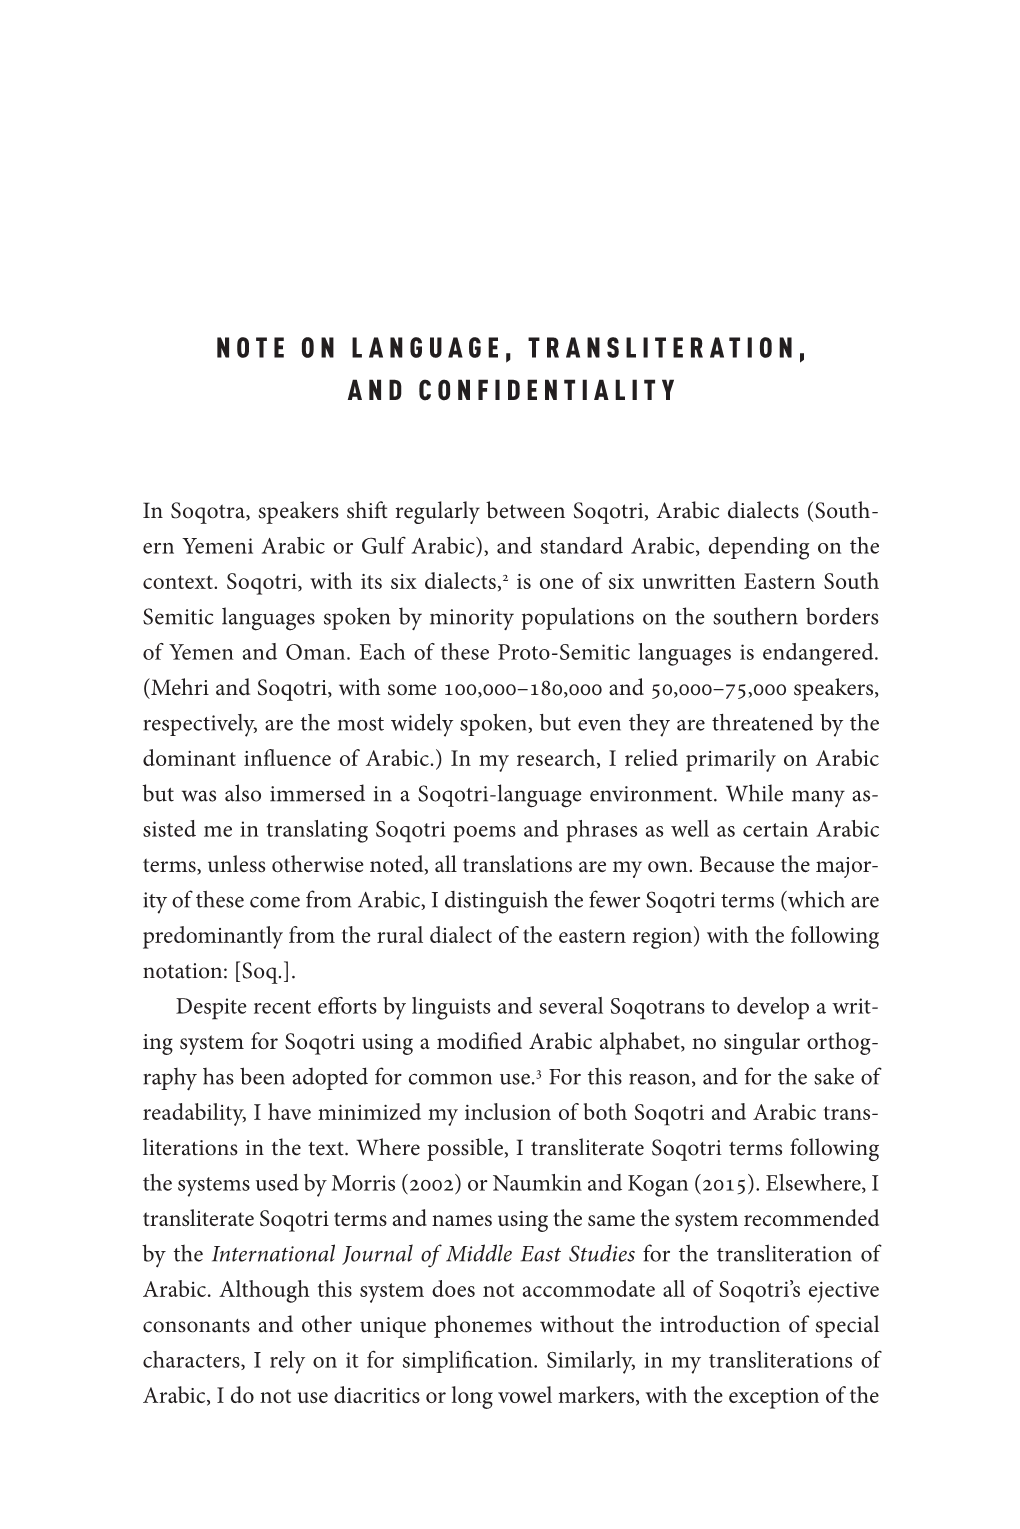 Note on Language, Transliteration, and Confidentiality